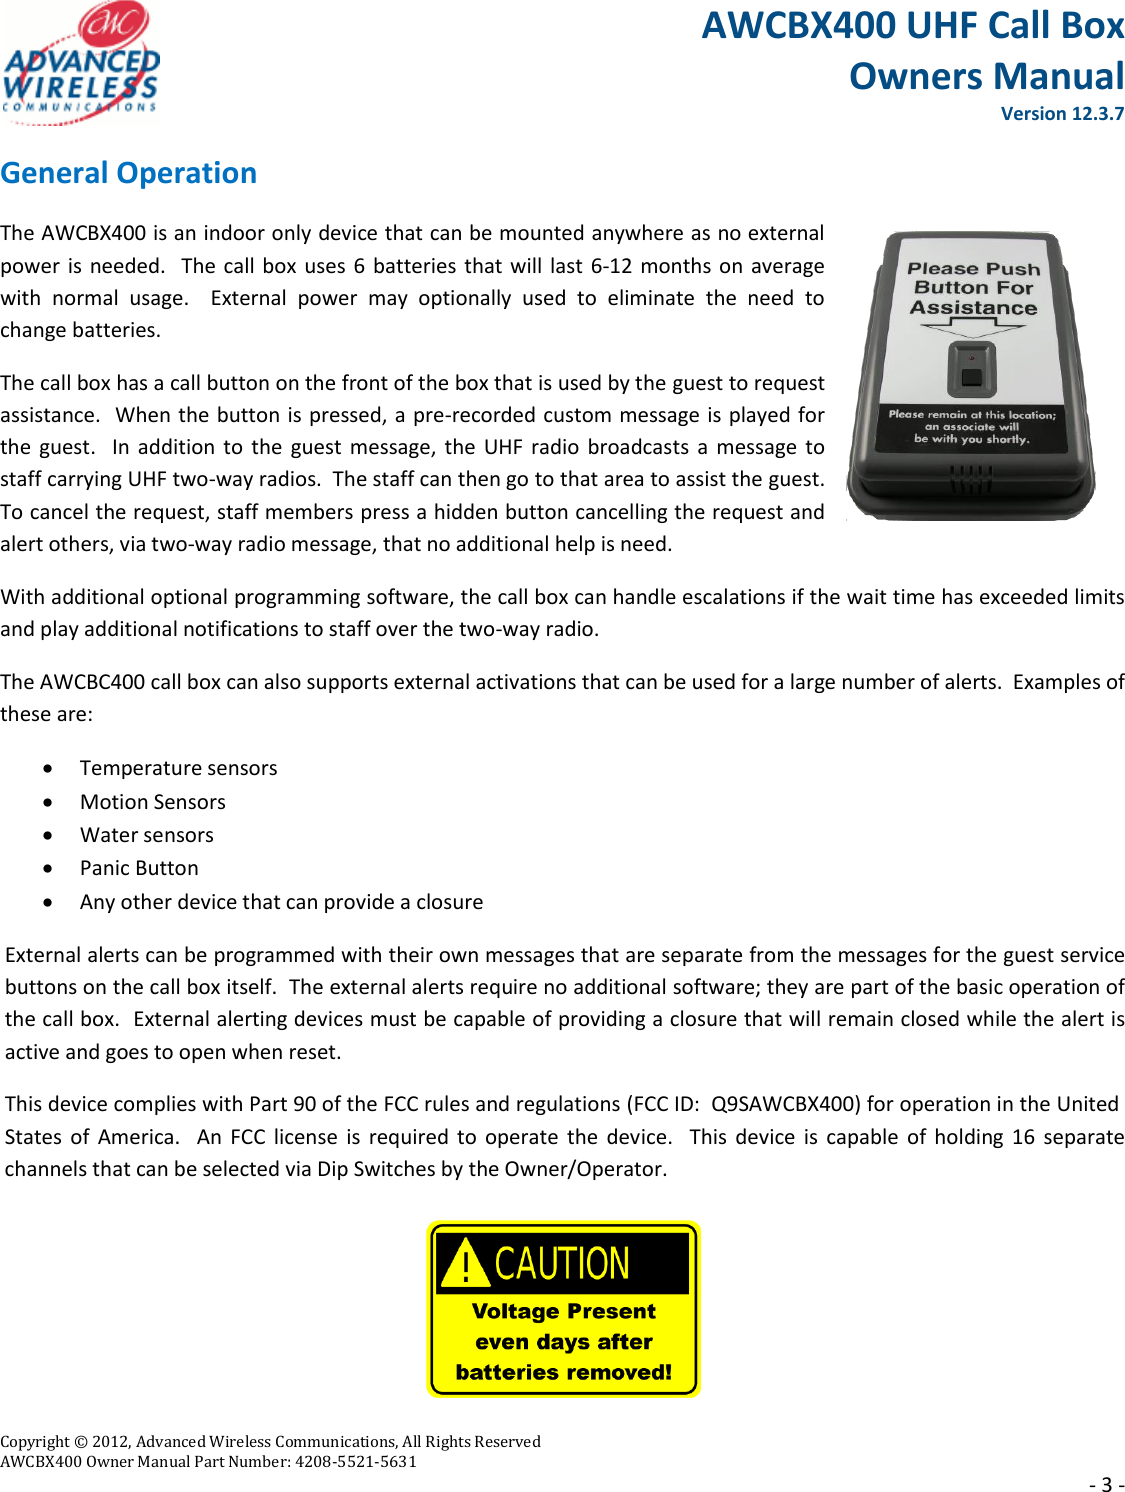 AWCBX400 UHF Call Box Owners Manual  Version 12.3.7   Copyright © 2012, Advanced Wireless Communications, All Rights Reserved  AWCBX400 Owner Manual Part Number: 4208-5521-5631     - 3 - General Operation The AWCBX400 is an indoor only device that can be mounted anywhere as no external power is needed.  The call box uses 6 batteries that will last 6-12 months on average with  normal  usage.    External  power  may  optionally  used  to  eliminate  the  need  to change batteries.  The call box has a call button on the front of the box that is used by the guest to request assistance.  When the button is pressed, a pre-recorded custom message is played for the guest.   In  addition to the guest  message,  the  UHF radio broadcasts  a message to staff carrying UHF two-way radios.  The staff can then go to that area to assist the guest.   To cancel the request, staff members press a hidden button cancelling the request and alert others, via two-way radio message, that no additional help is need. With additional optional programming software, the call box can handle escalations if the wait time has exceeded limits and play additional notifications to staff over the two-way radio. The AWCBC400 call box can also supports external activations that can be used for a large number of alerts.  Examples of these are:  Temperature sensors  Motion Sensors  Water sensors  Panic Button  Any other device that can provide a closure External alerts can be programmed with their own messages that are separate from the messages for the guest service buttons on the call box itself.  The external alerts require no additional software; they are part of the basic operation of the call box.  External alerting devices must be capable of providing a closure that will remain closed while the alert is active and goes to open when reset. This device complies with Part 90 of the FCC rules and regulations (FCC ID:  Q9SAWCBX400) for operation in the United States  of  America.   An FCC  license  is required to  operate  the device.   This  device  is capable of  holding  16 separate channels that can be selected via Dip Switches by the Owner/Operator.      